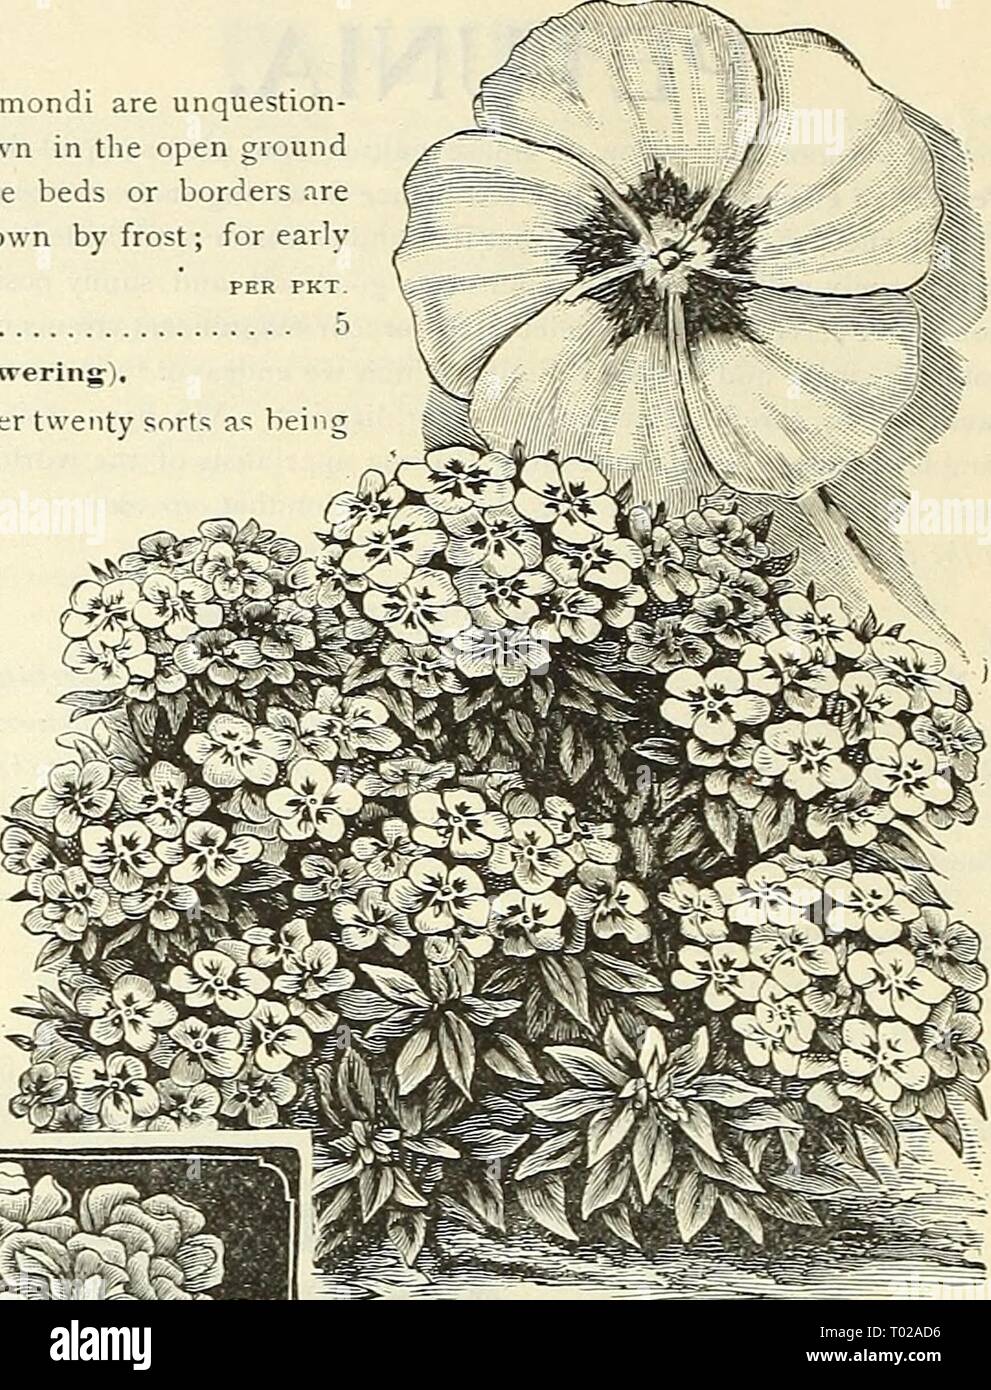 Dreer's garden calendar : 1903 . dreersgardencale1903henr Year: 1903  Large Flowering Dwarf Phlox. DOUBLE PHLOX. Especially desirable for cut flowers, last- ing better than the single sorts. To produce the best results they should be grown in a light soil (See cut.) PER PKT. 3637 Yellow. Pale primrose 10 3635 Scarlet. Brilliant color 10 3636 White. Profuse bloomer 10 One packet each of the three double, 25 cts. Phlox, Docele White Orientale Hybrid Poipies PERENNIAL PHLOX. 3641 Hardy herbaceous perennials; all colors mixed; saved from our own unequalled collection 10 HARDY PERENNIAL POPPIES. 37 Stock Photo